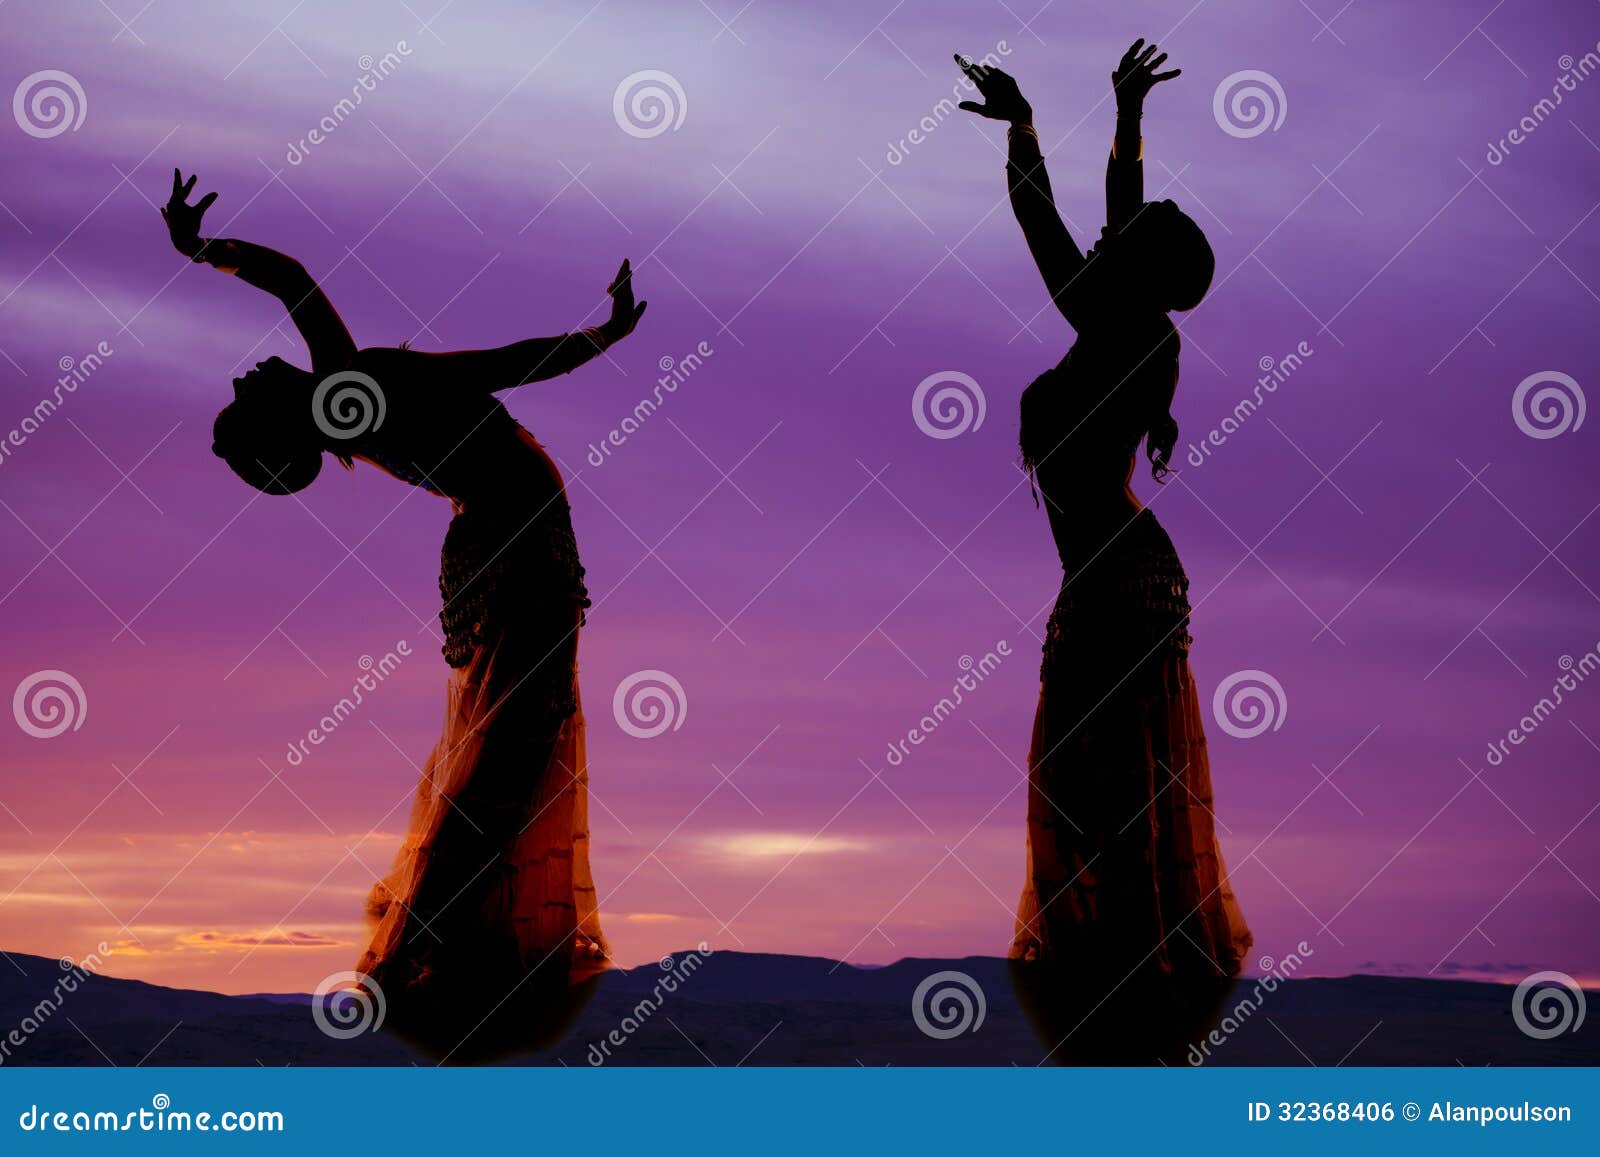 belly dancer purple silhouette two